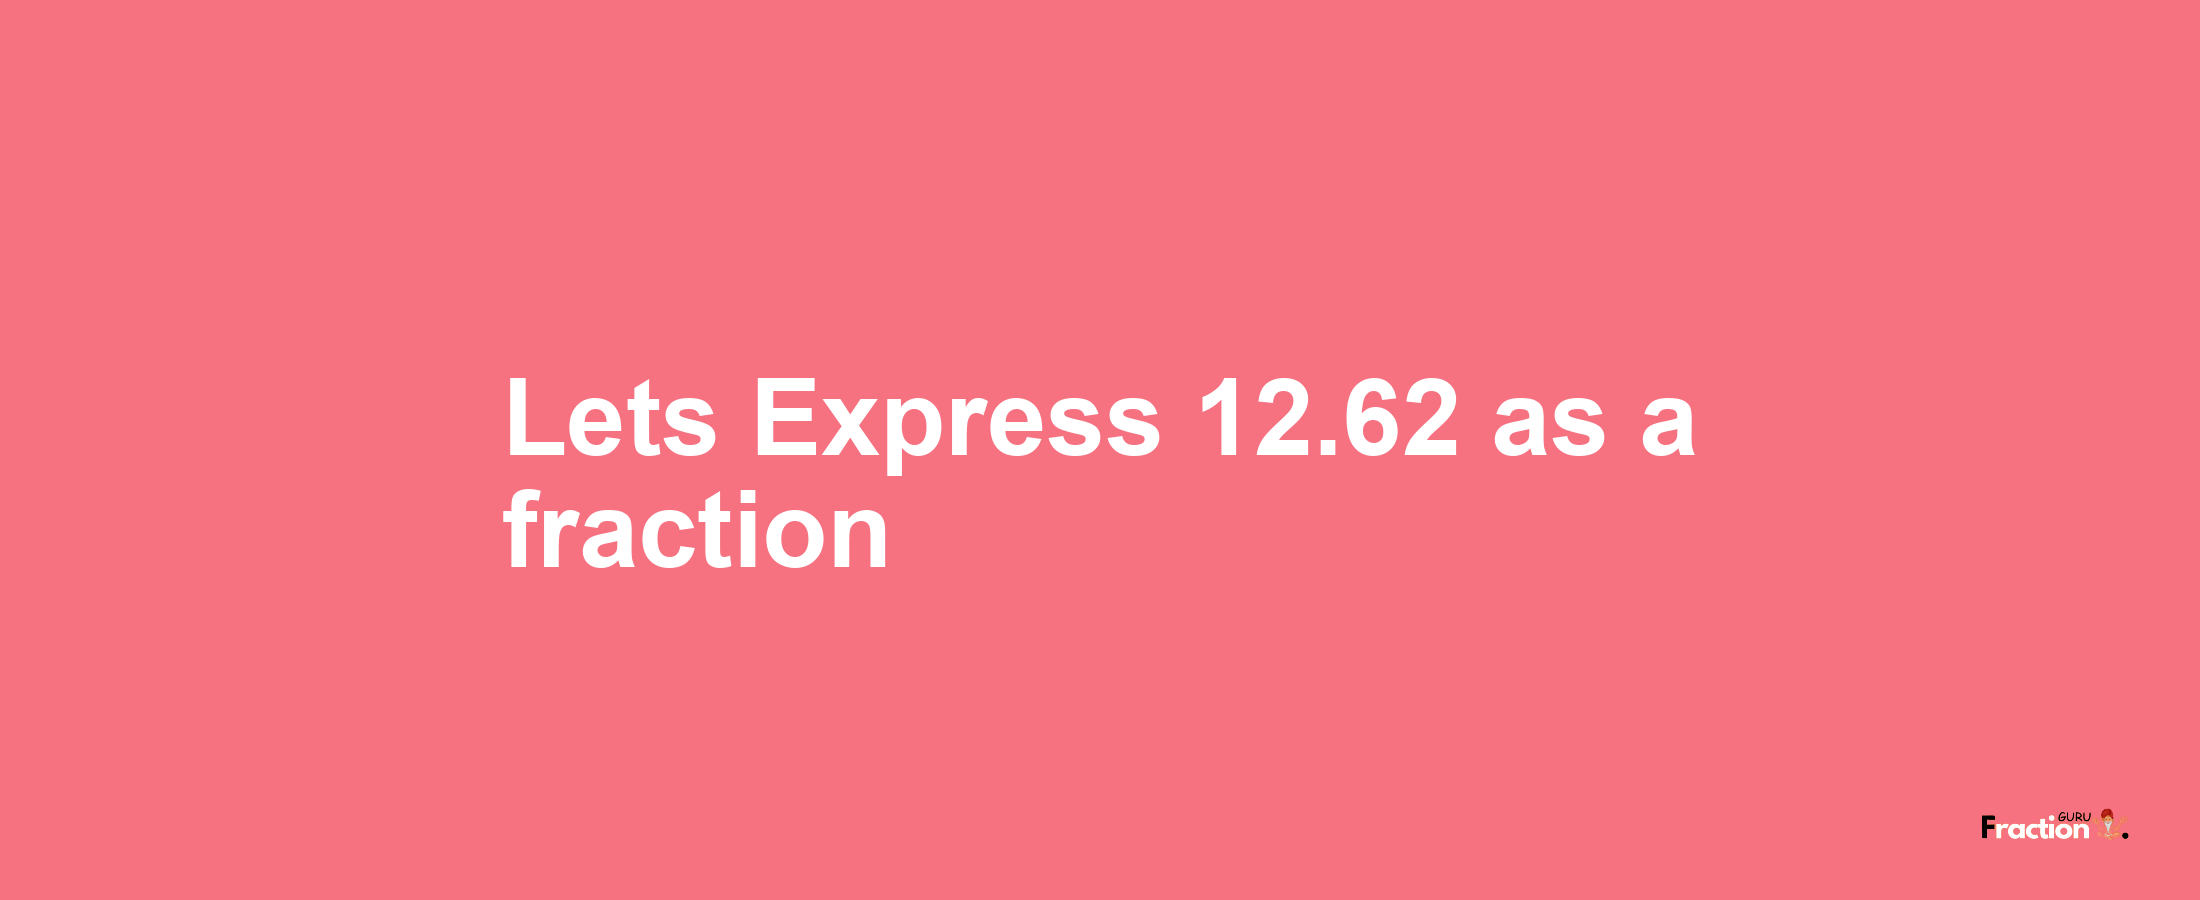 Lets Express 12.62 as afraction